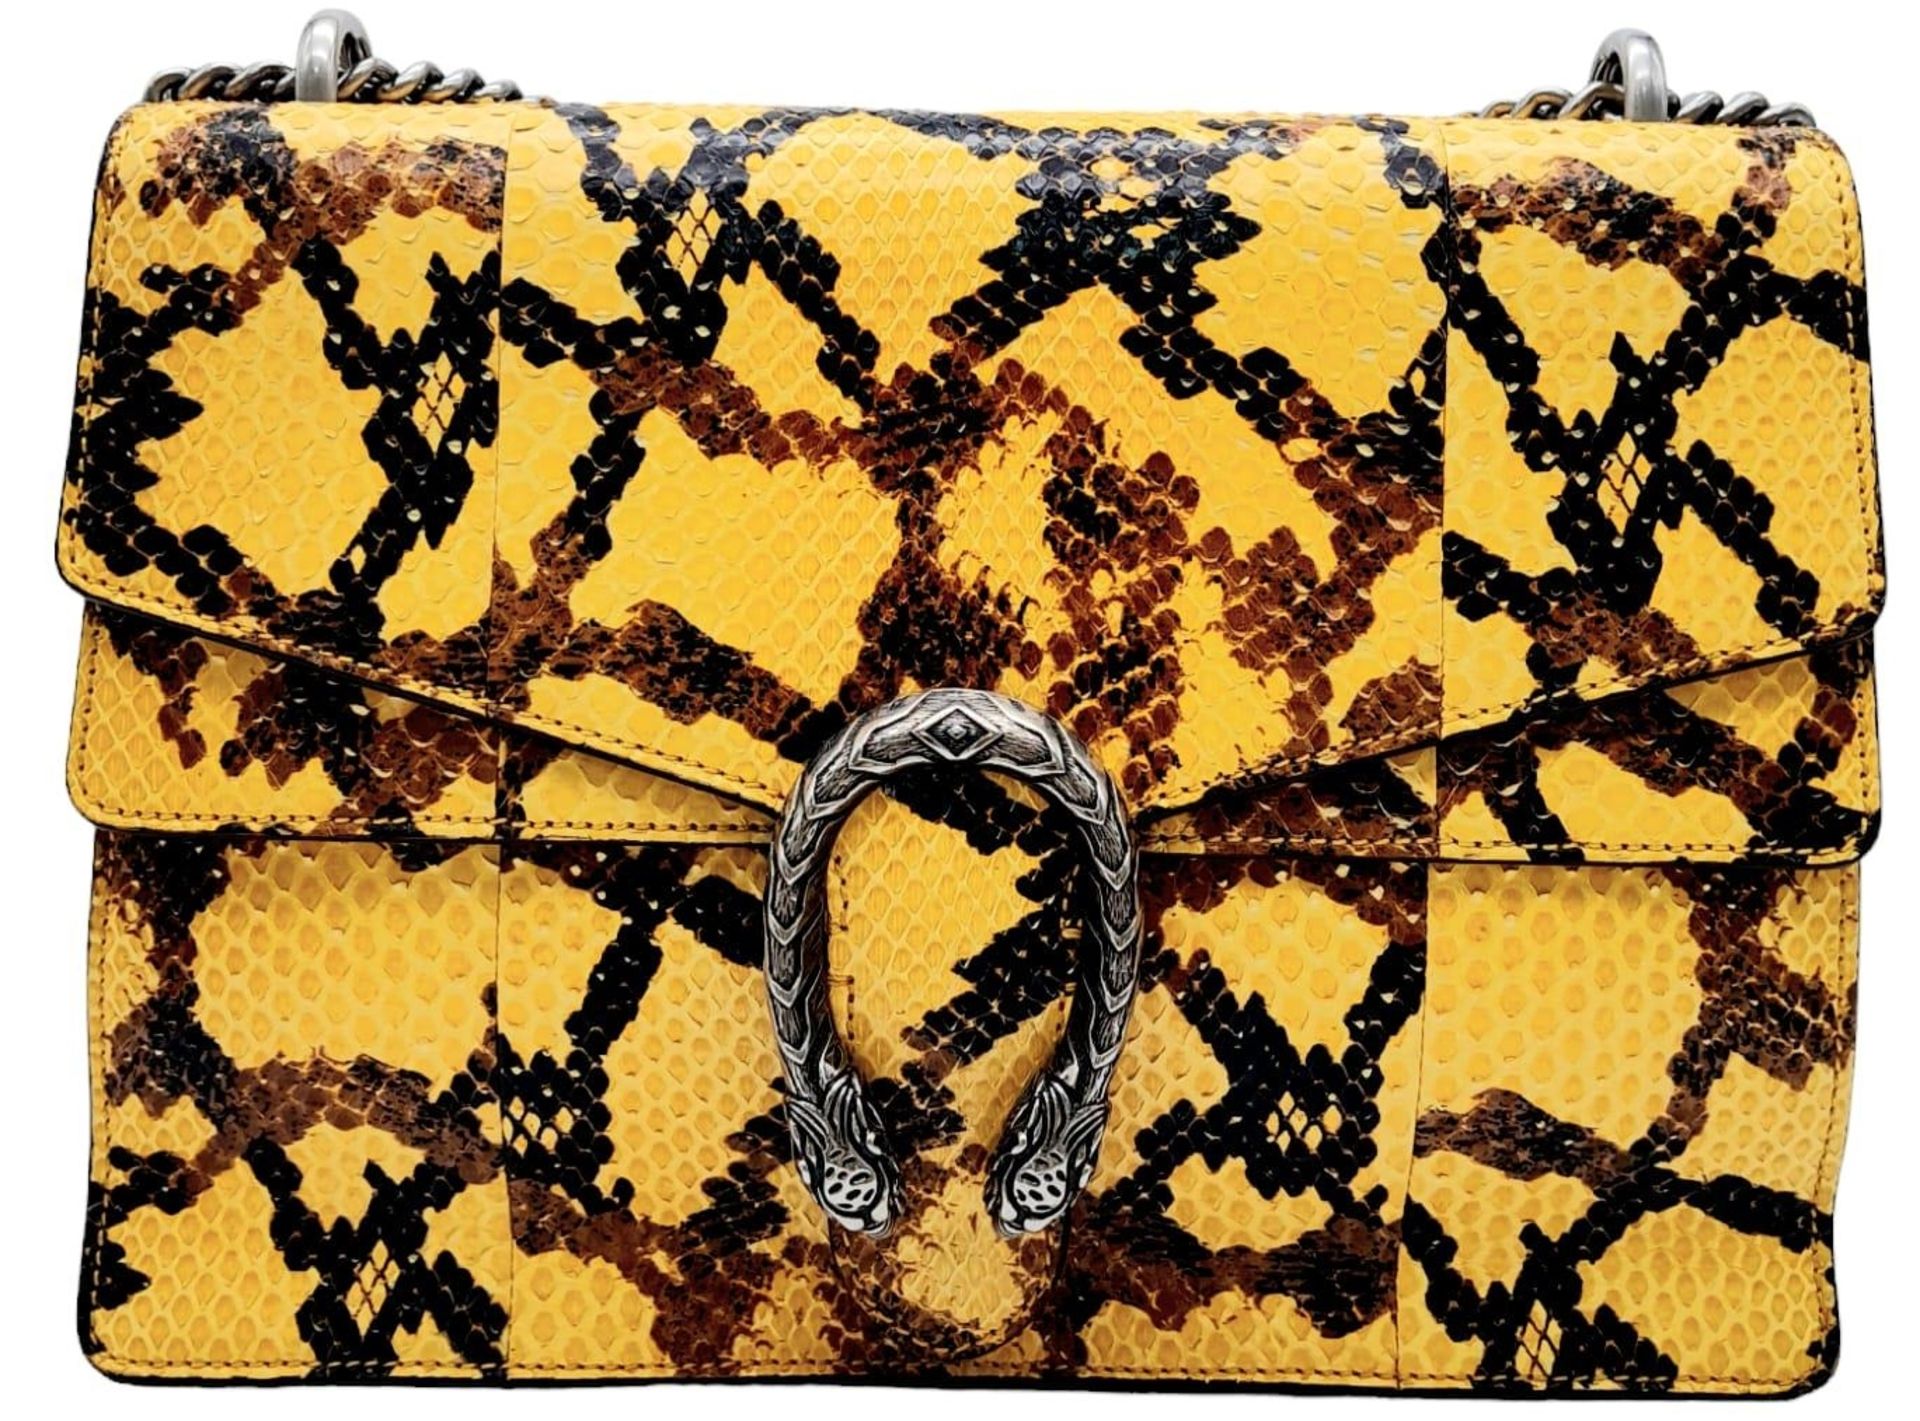 A Gucci Dionysus Python Pochette. With Silver Metal Hardware and Convertible Silver Metal Chain - Bild 3 aus 11